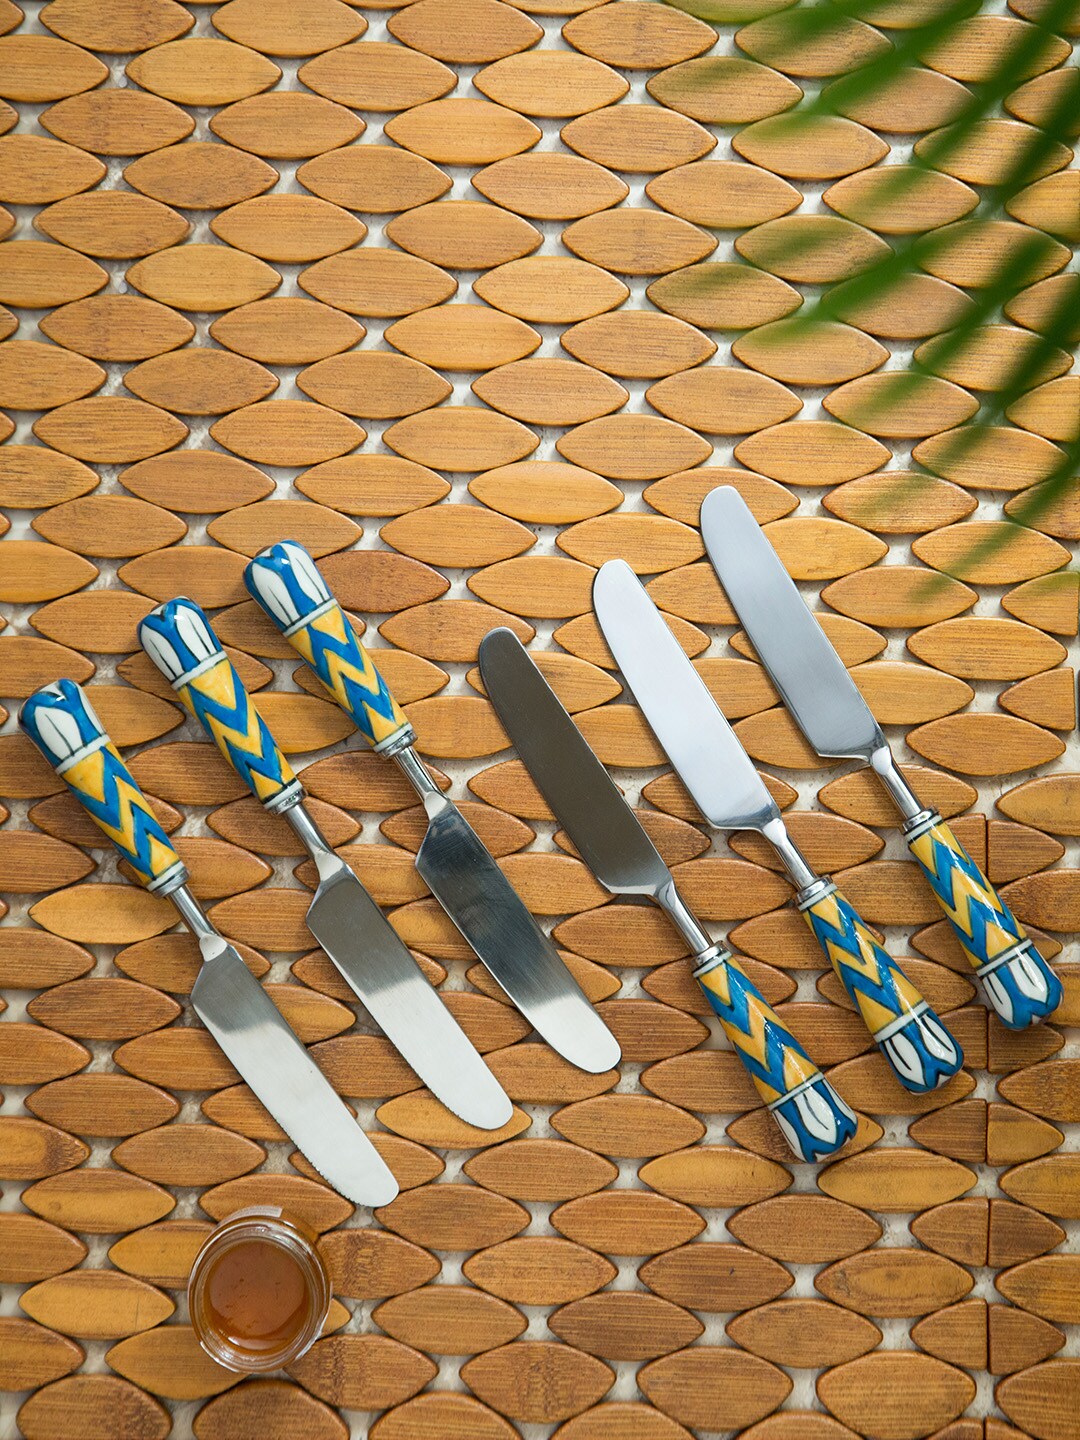 ExclusiveLane Silver-Toned 6-Pieces The Mughal Paich Daar Hand-Painted Stainless Steel Table Knives Price in India